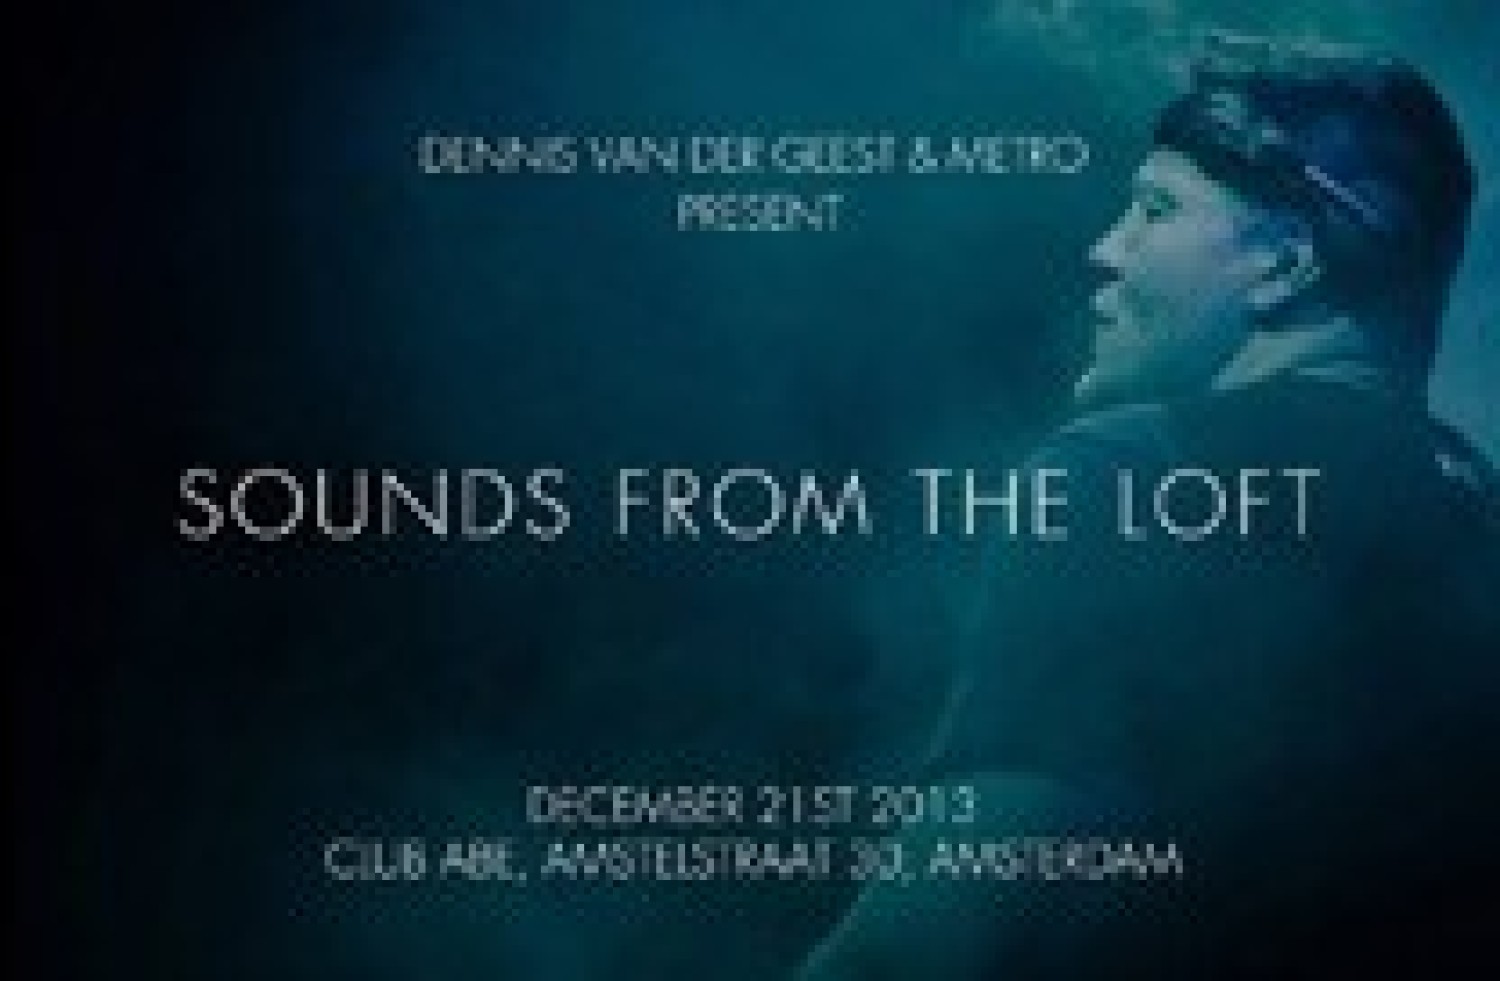 Party nieuws: Sounds from the Loft, as zaterdag in Club ABE Amsterdam!